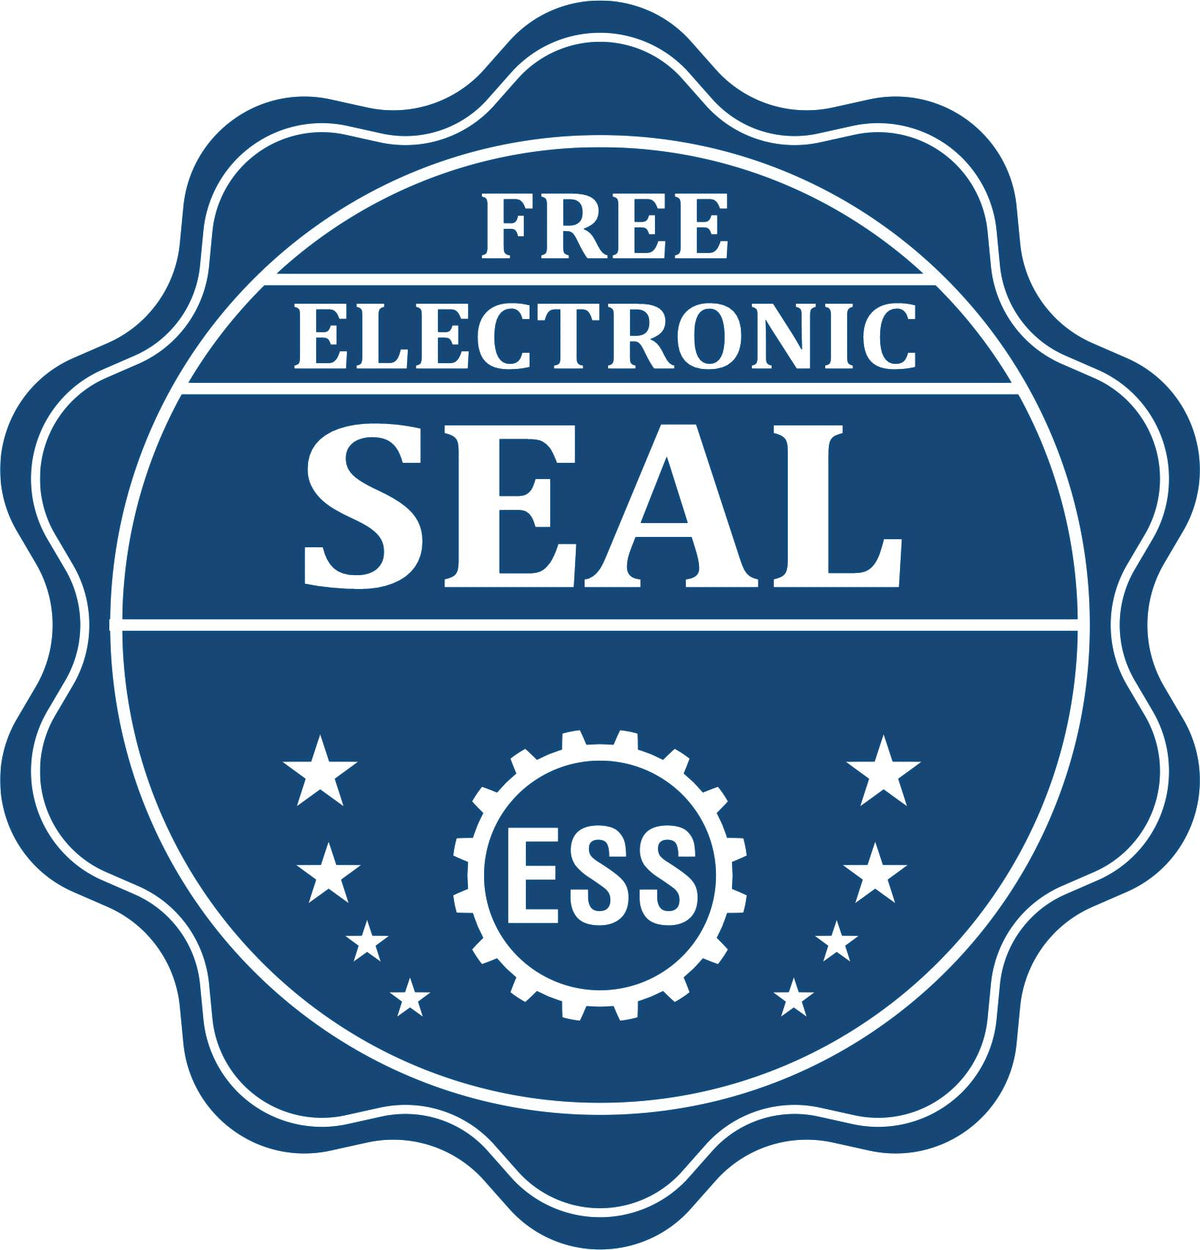 A badge showing a free electronic seal for the State of Arizona Extended Long Reach Geologist Seal with stars and the ESS gear on the emblem.